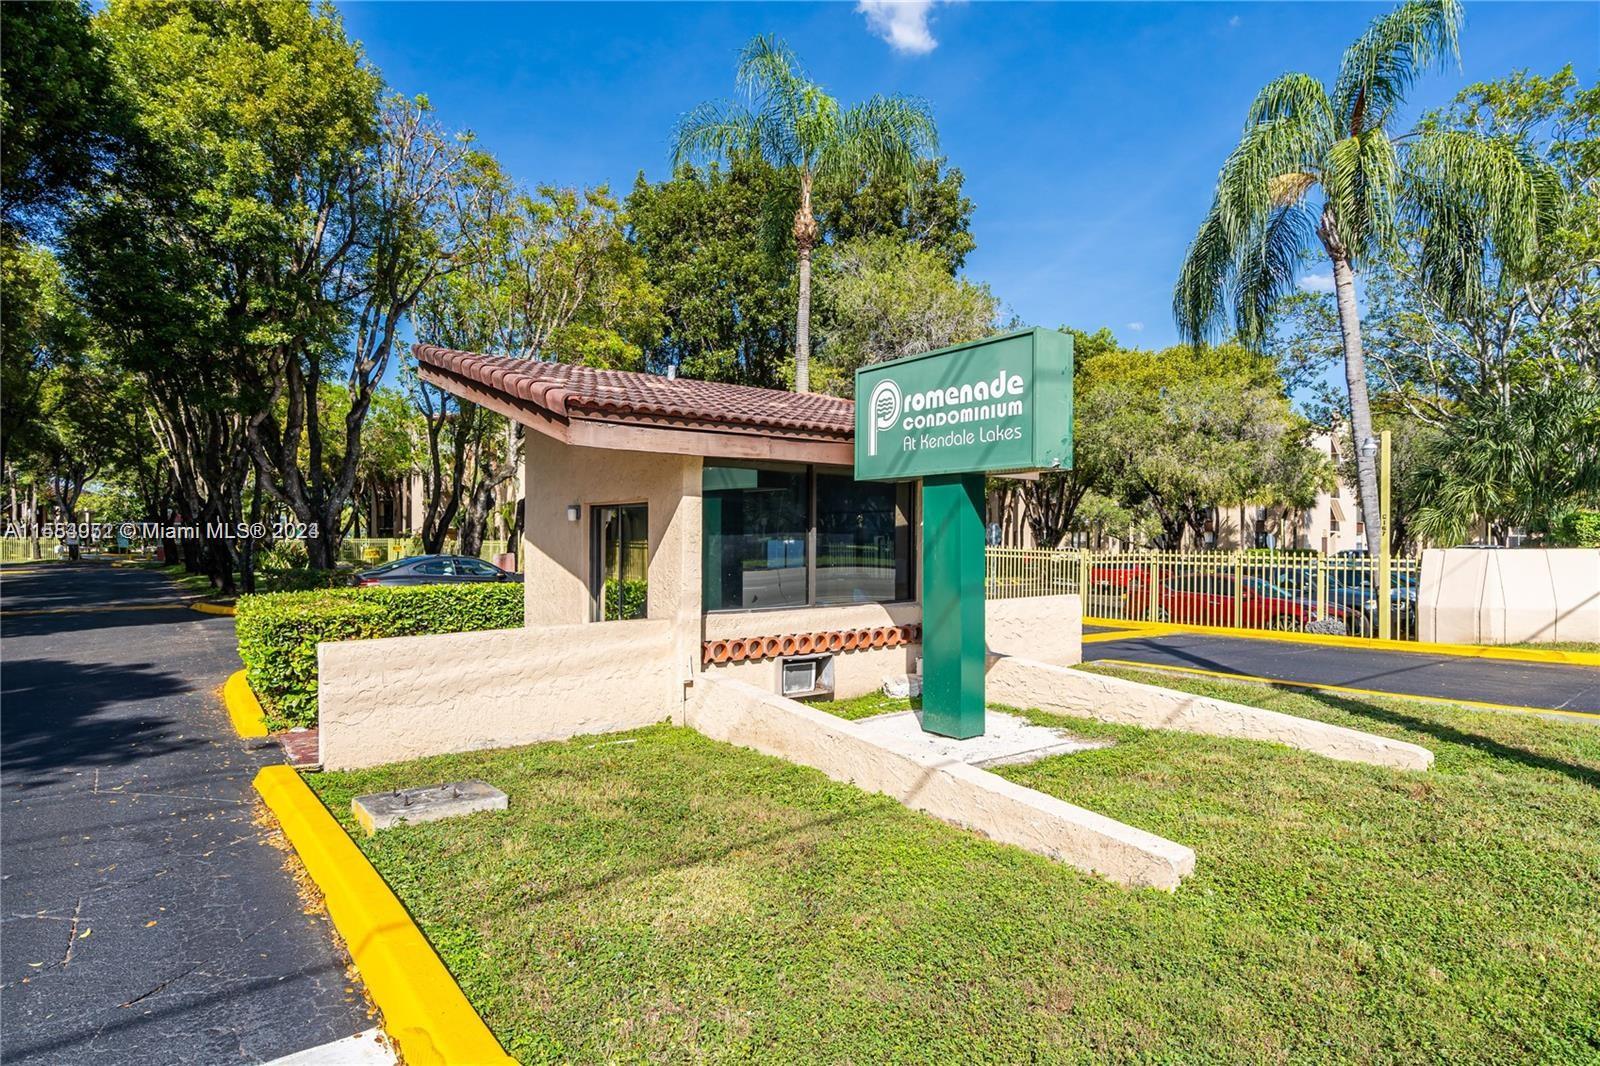 14201 N Kendall Dr 312D, Miami, Florida 33186, 1 Bedroom Bedrooms, ,1 BathroomBathrooms,Residentiallease,For Rent,14201 N Kendall Dr 312D,A11554952